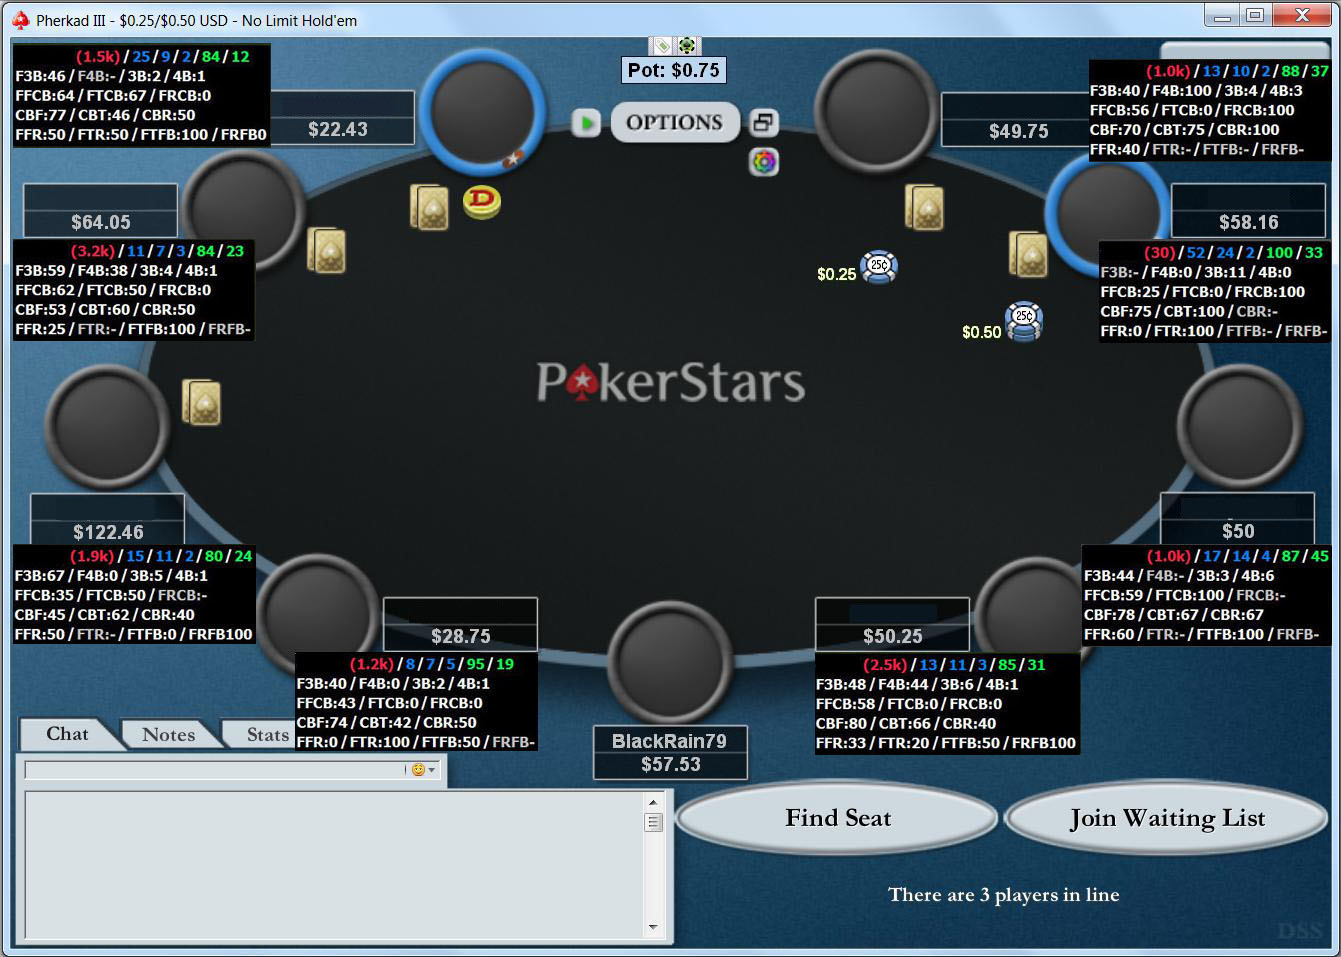 lips con man Put away clothes The Top 3 Poker Tools Used by Online Pros in 2022 | BlackRain79 - Micro  Stakes Poker Strategy